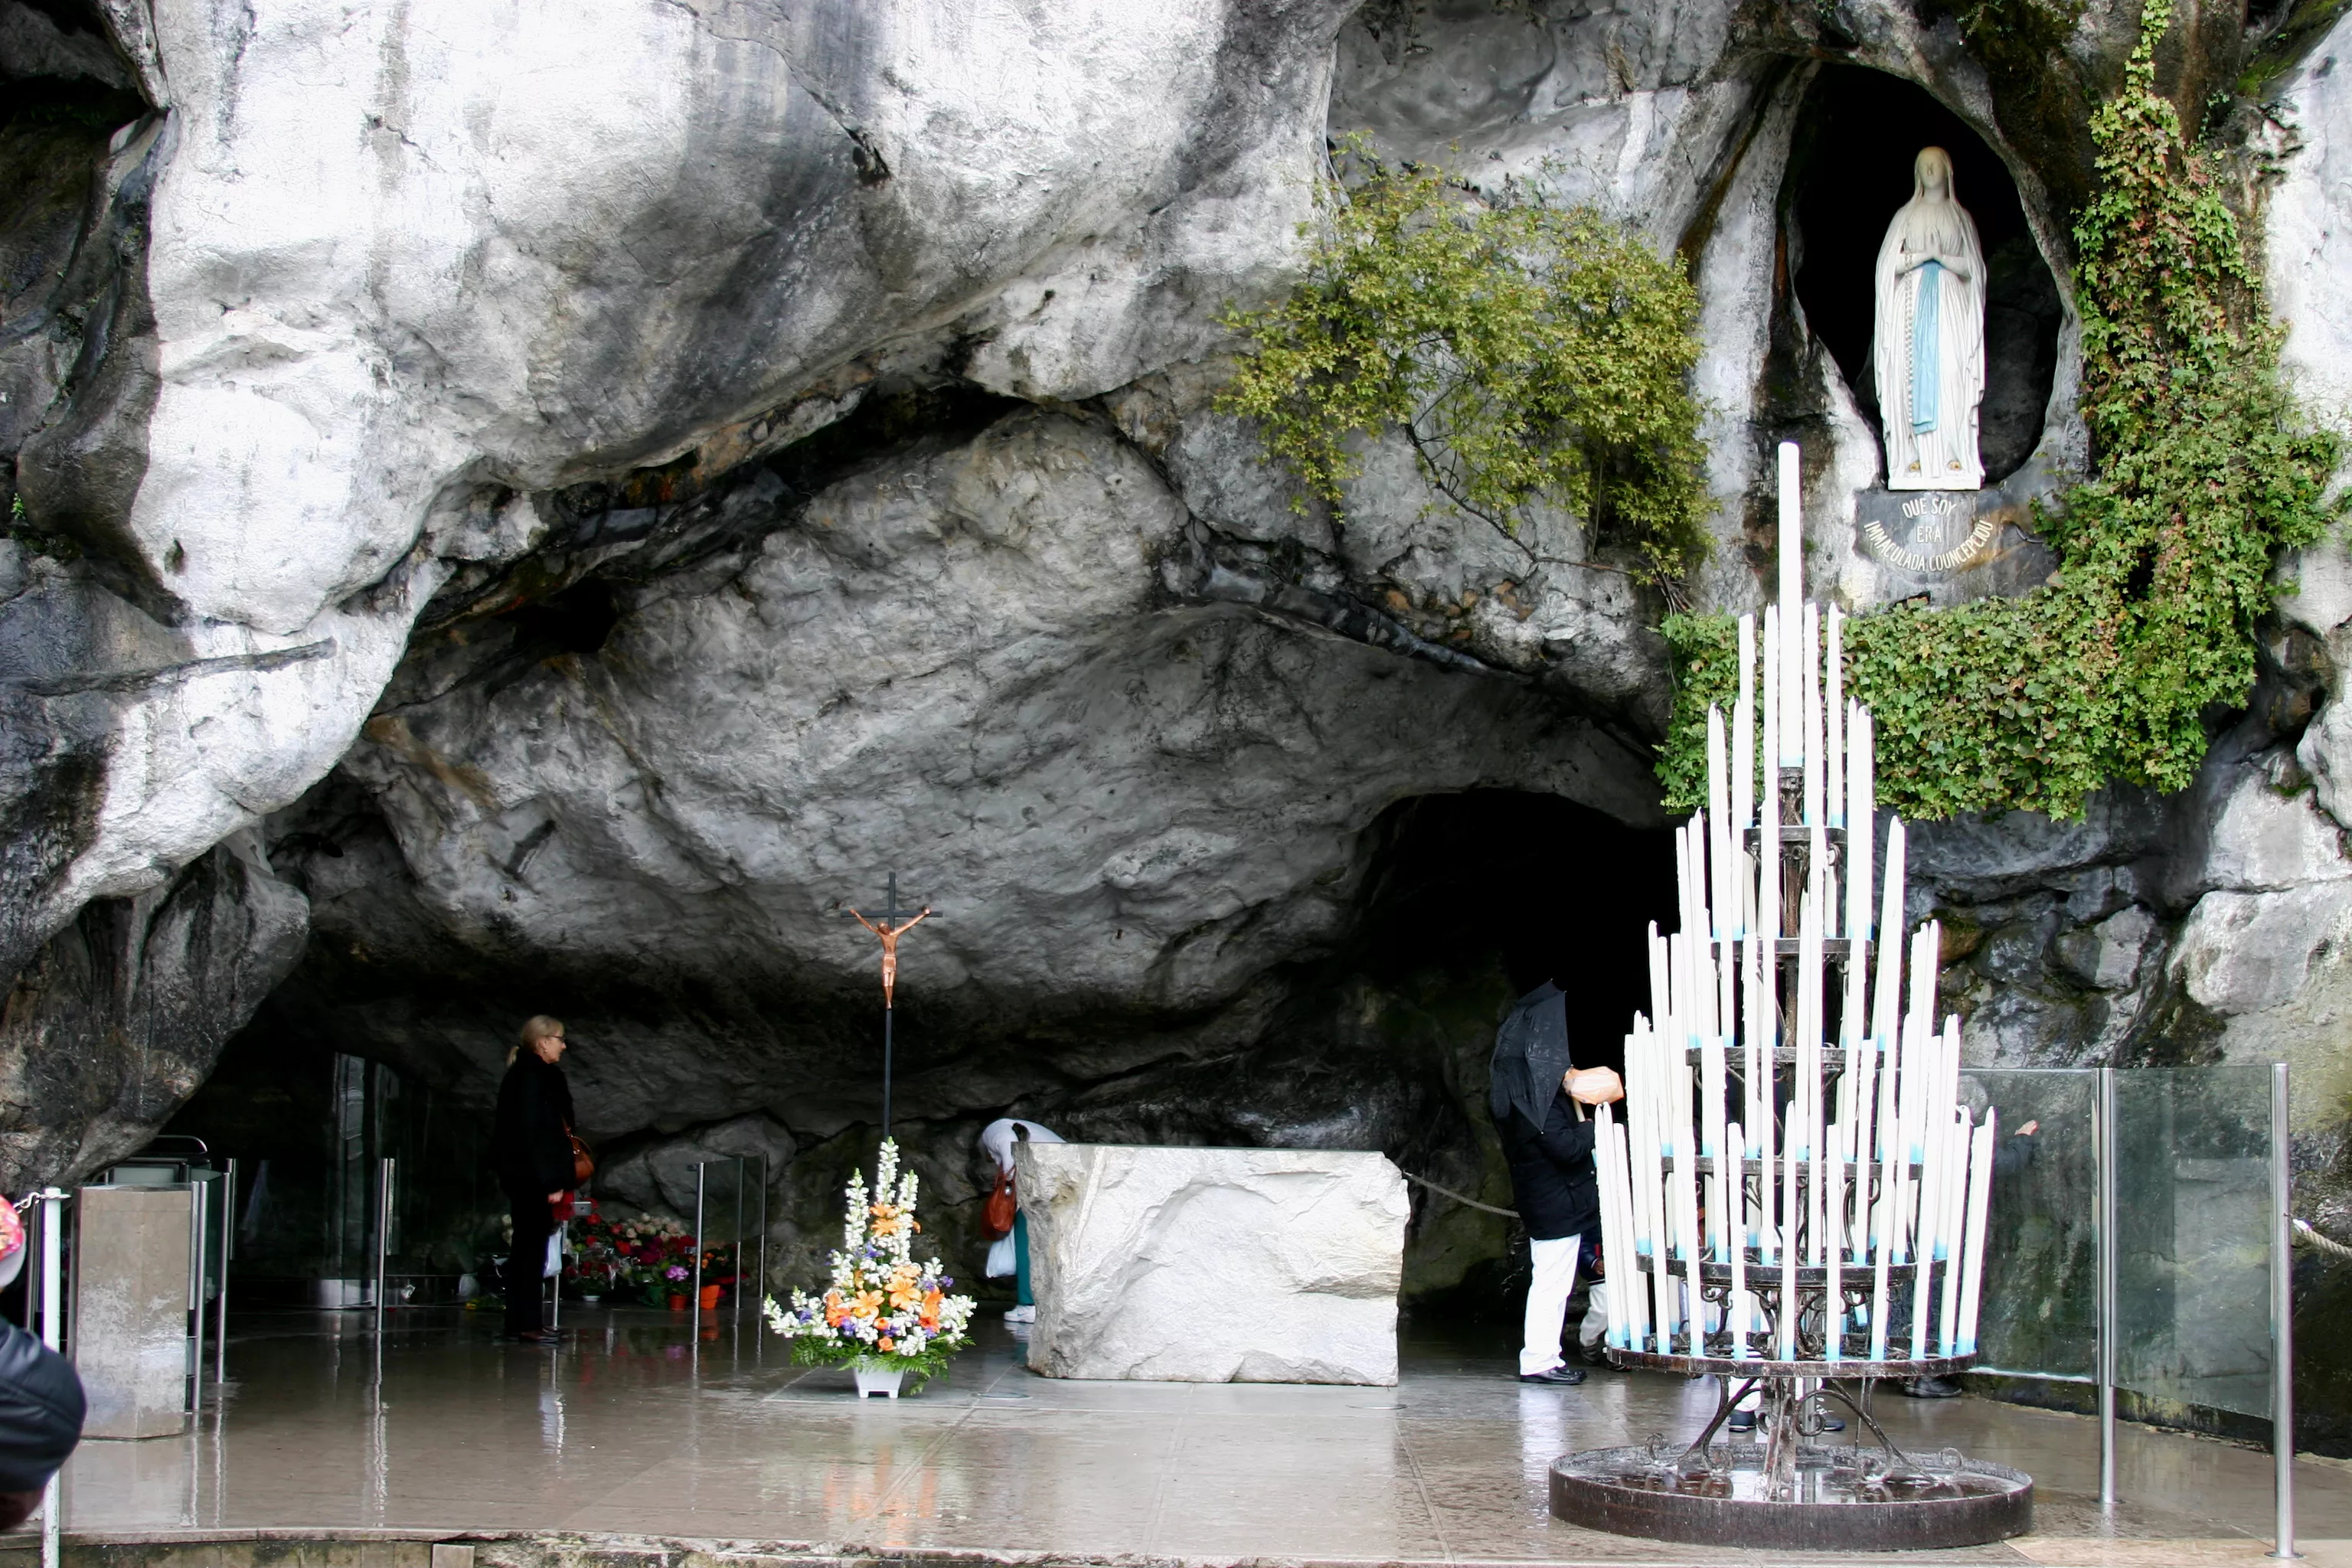 Lourdes Grotto in Austria, Europe | Caves & Underground Places - Rated 3.7